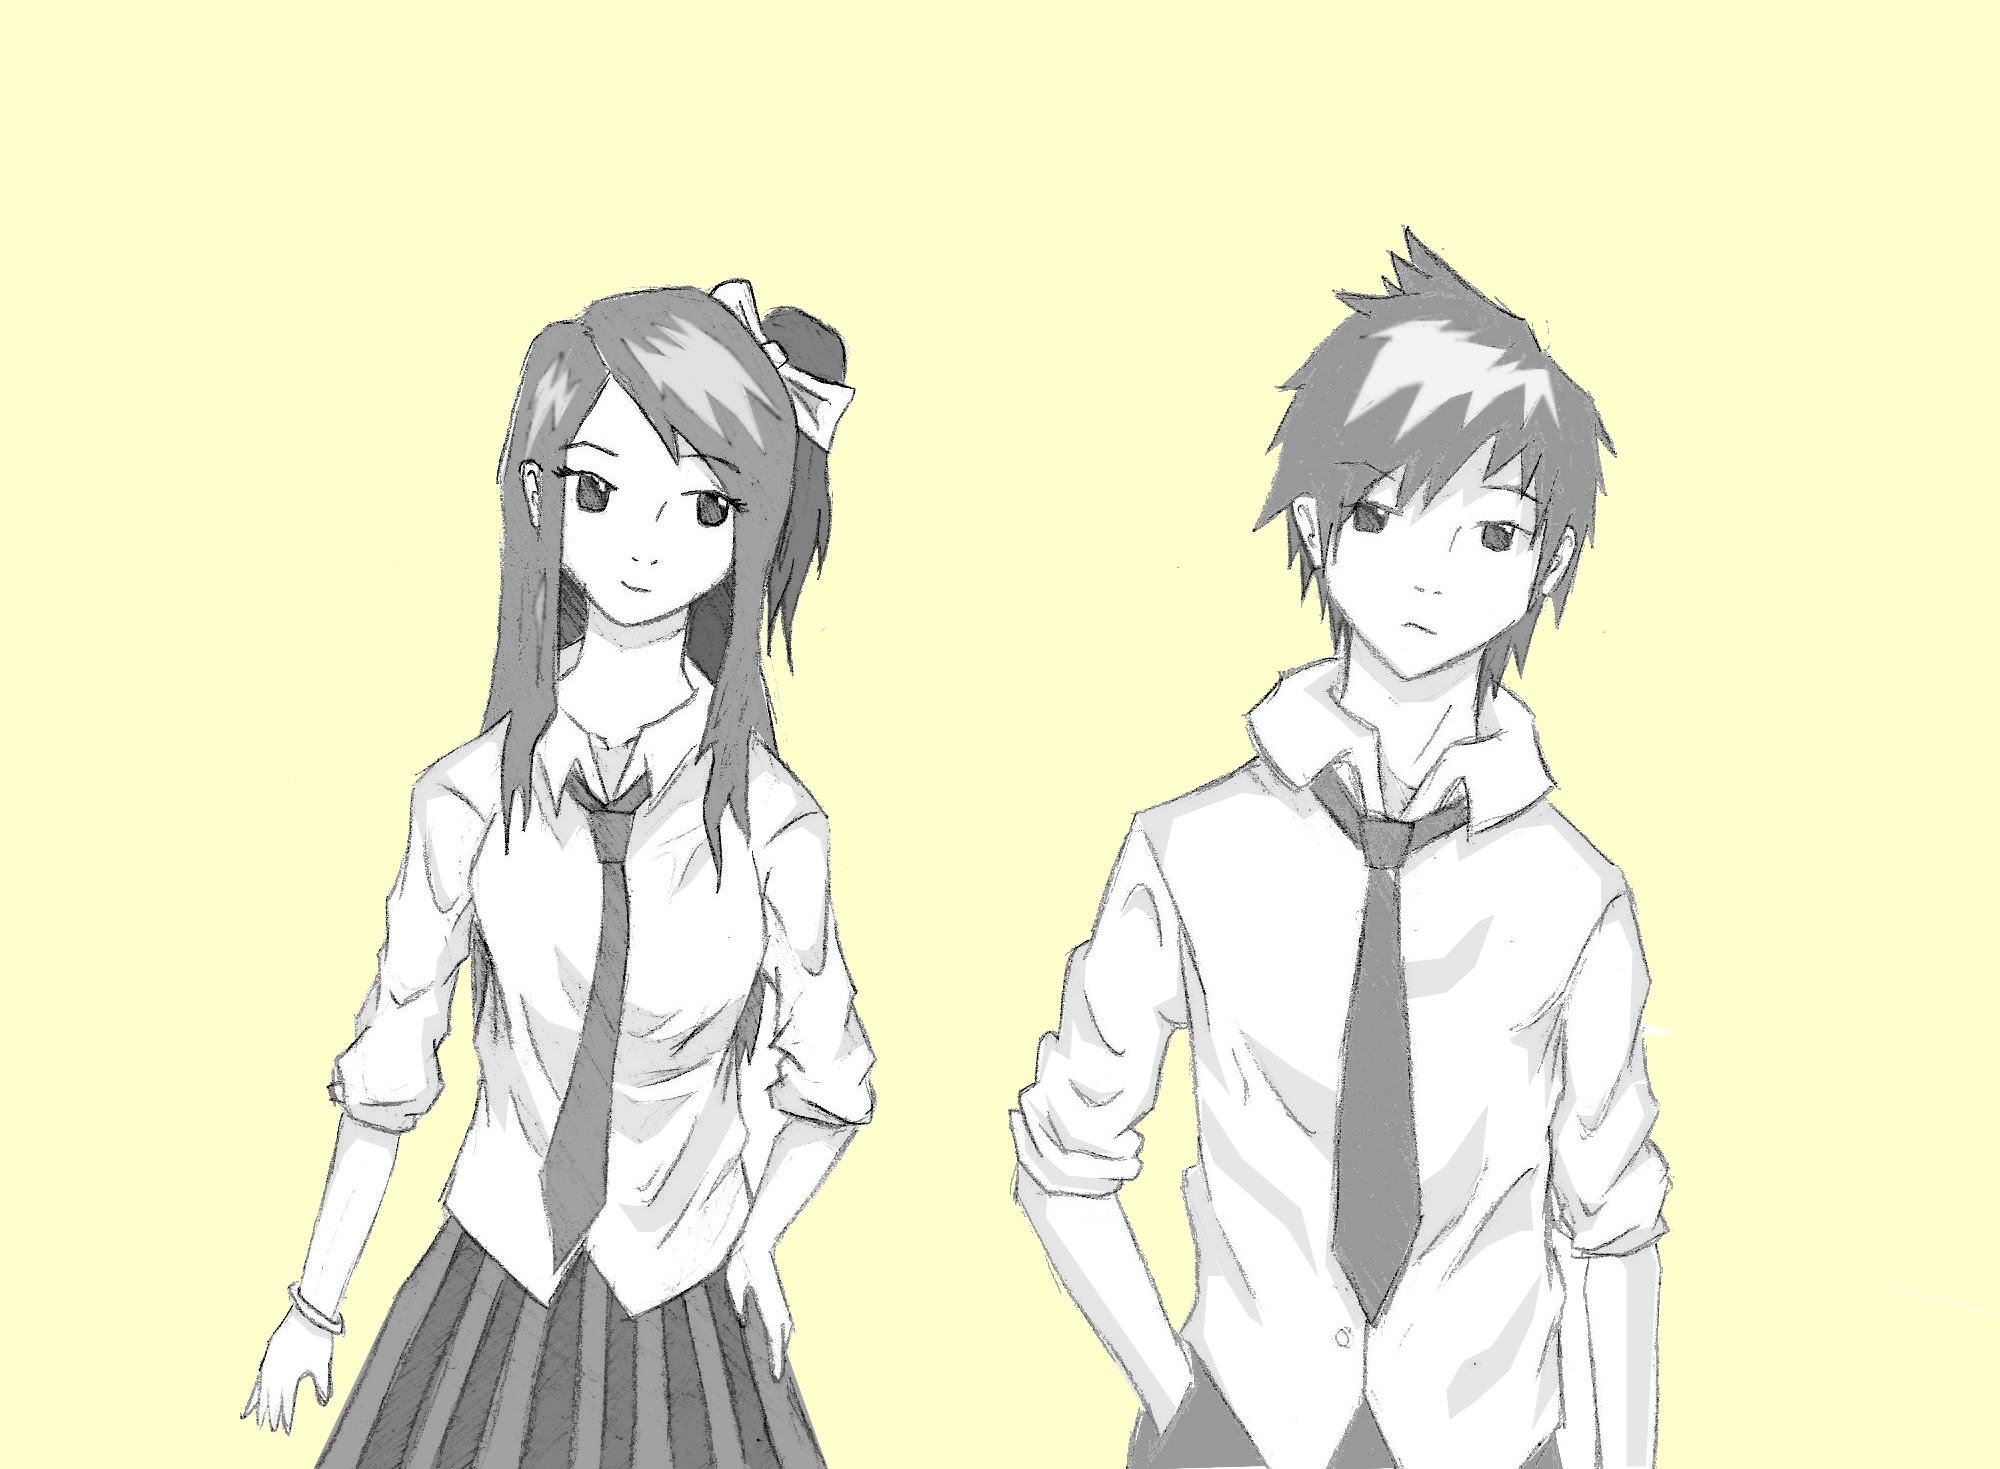 Friendship Anime Girl And Boy Drawing